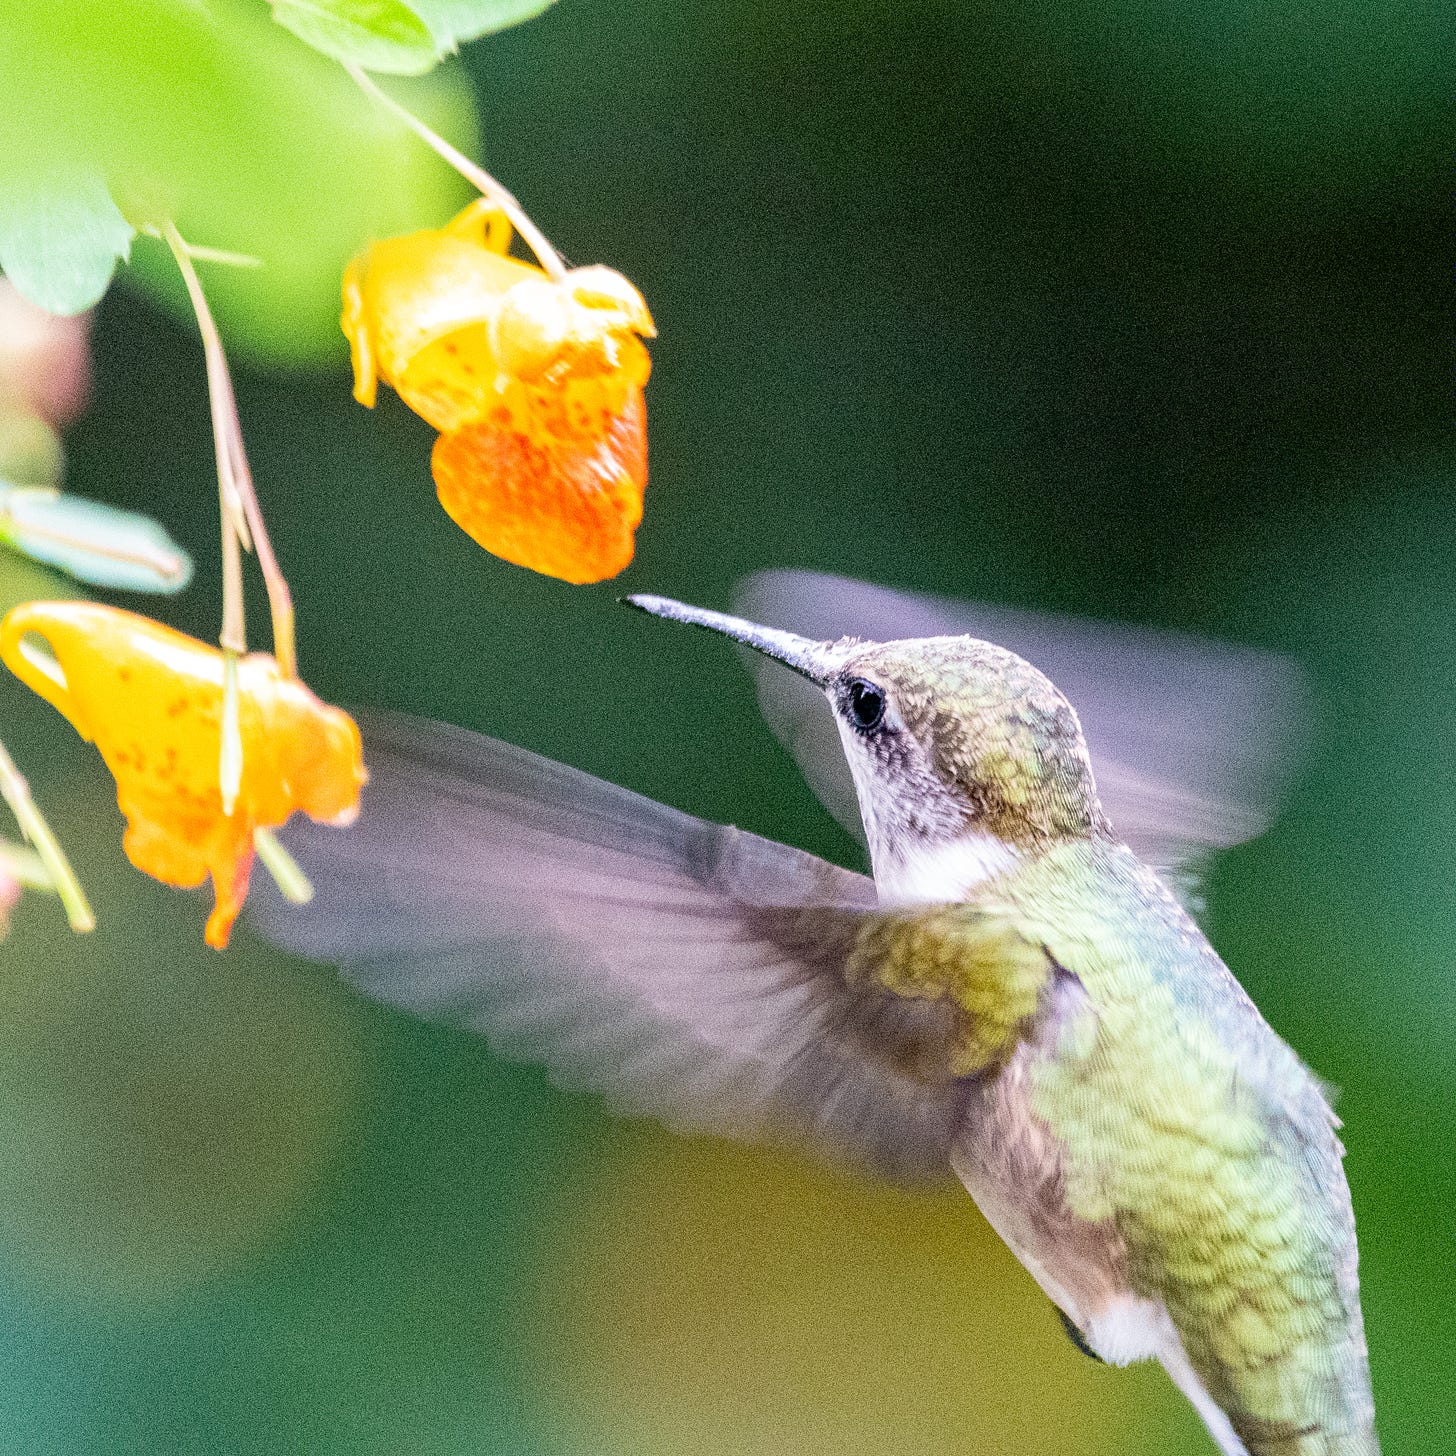 A hummingbird with an emerald cap and back hovers, its wings blurry from speed, in front of an orange touch-me-not